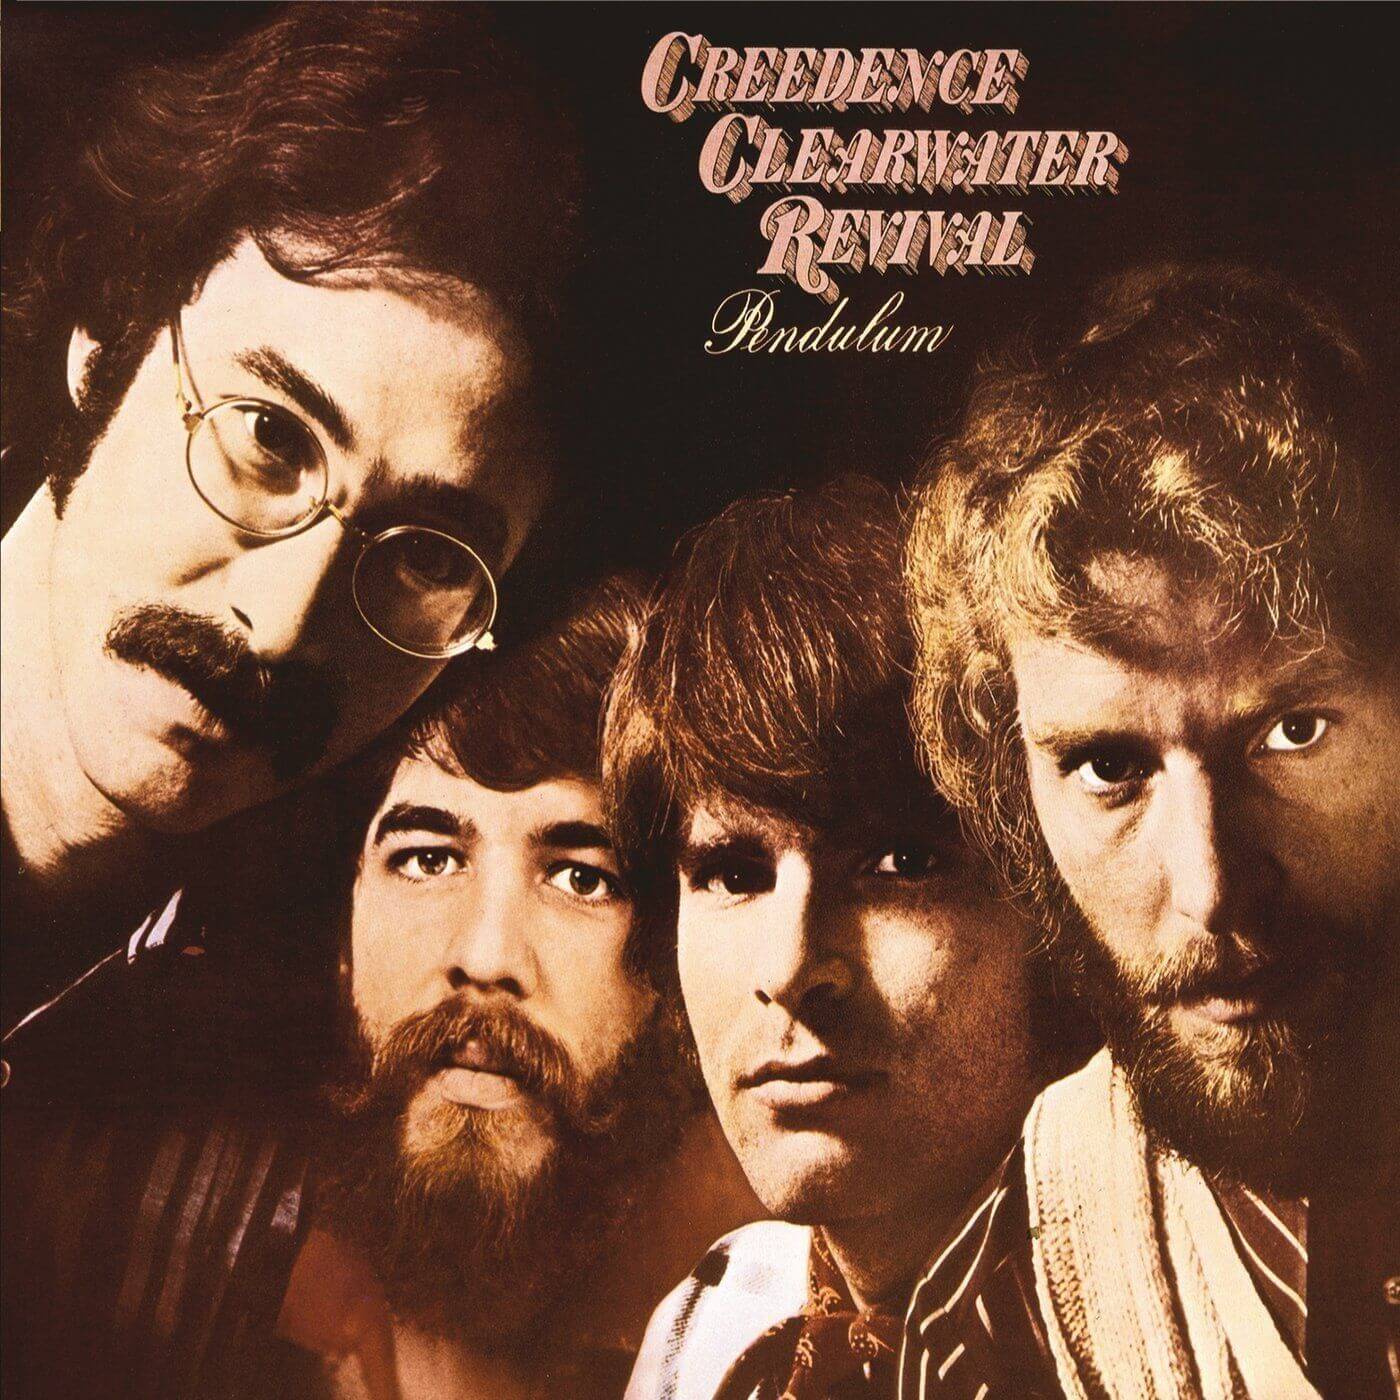 Foto del disco creedence clearwater revival